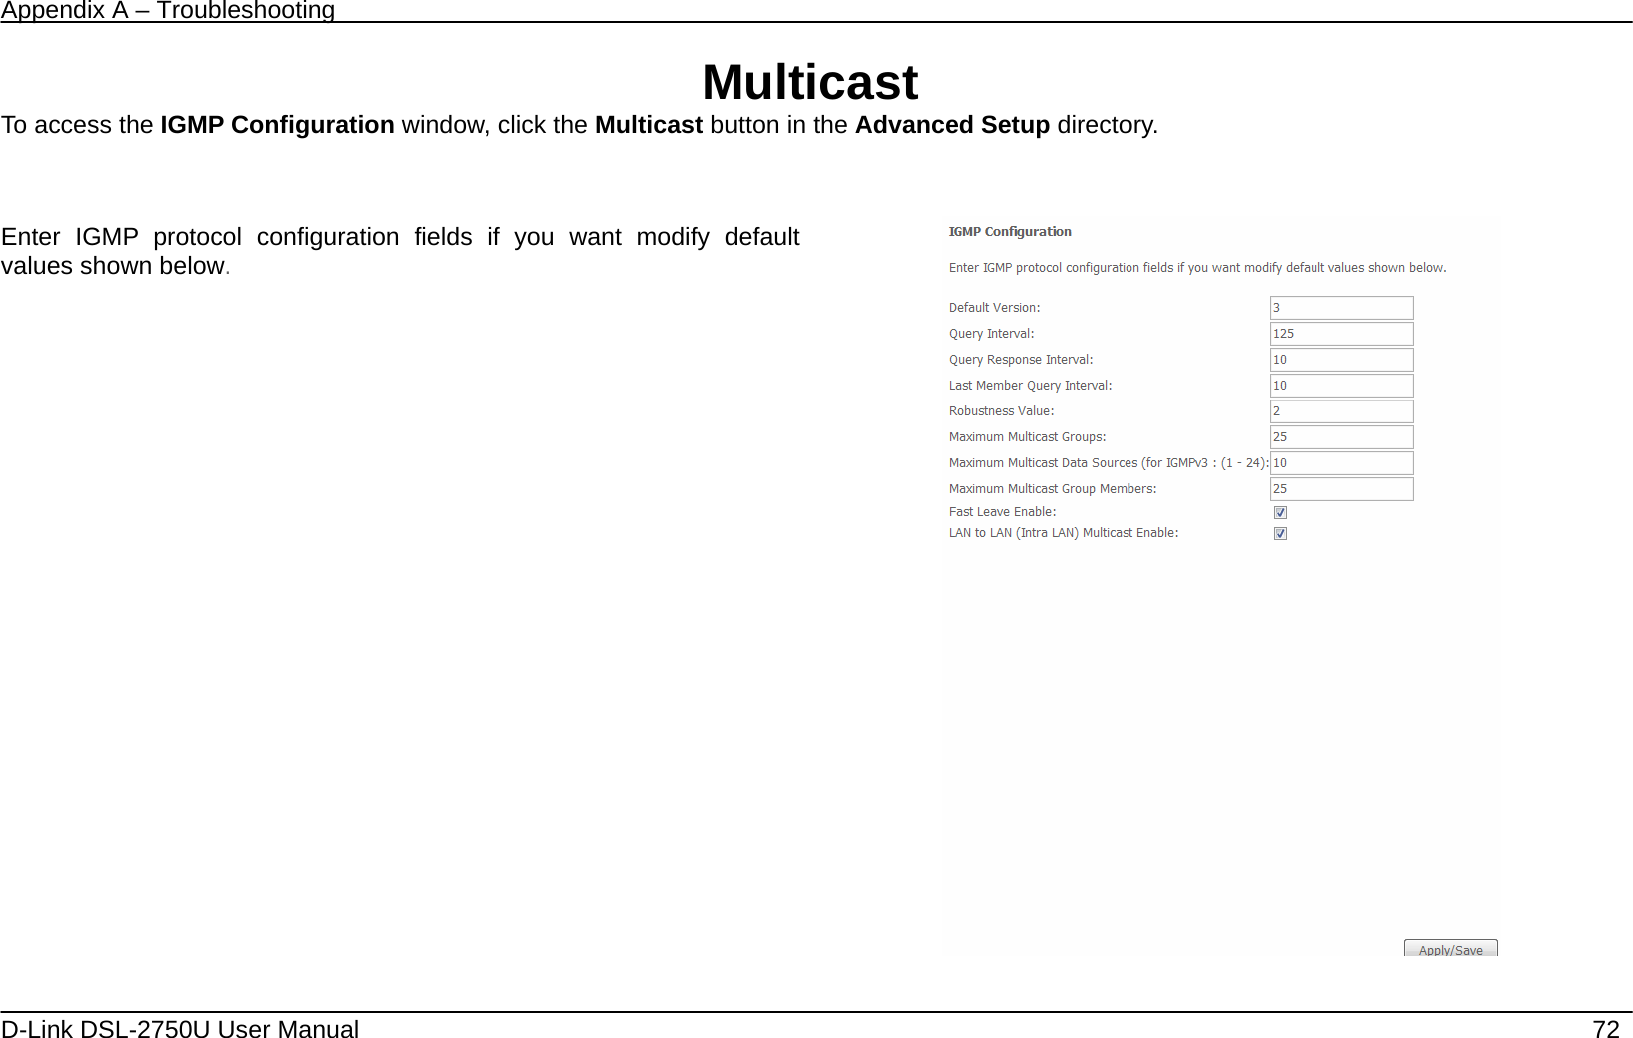 Appendix A – Troubleshooting   D-Link DSL-2750U User Manual    72 Multicast To access the IGMP Configuration window, click the Multicast button in the Advanced Setup directory.   Enter IGMP protocol configuration fields if you want modify default values shown below.       